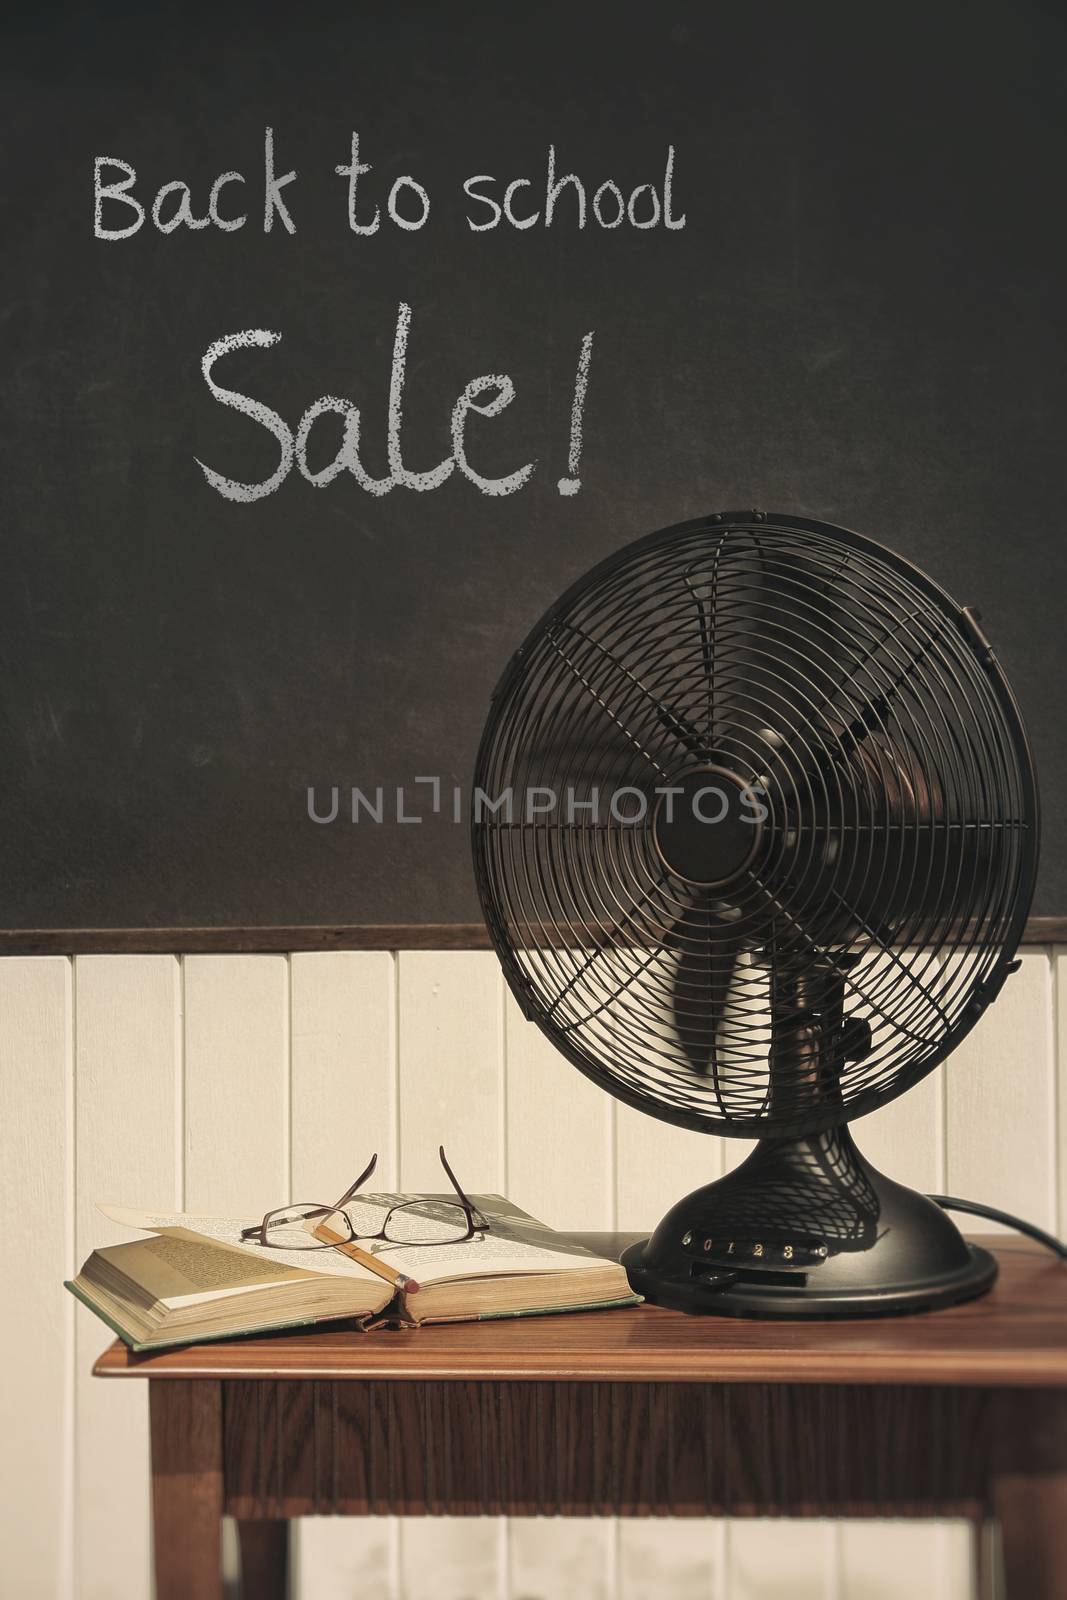 Vintage electric fan with book on table 